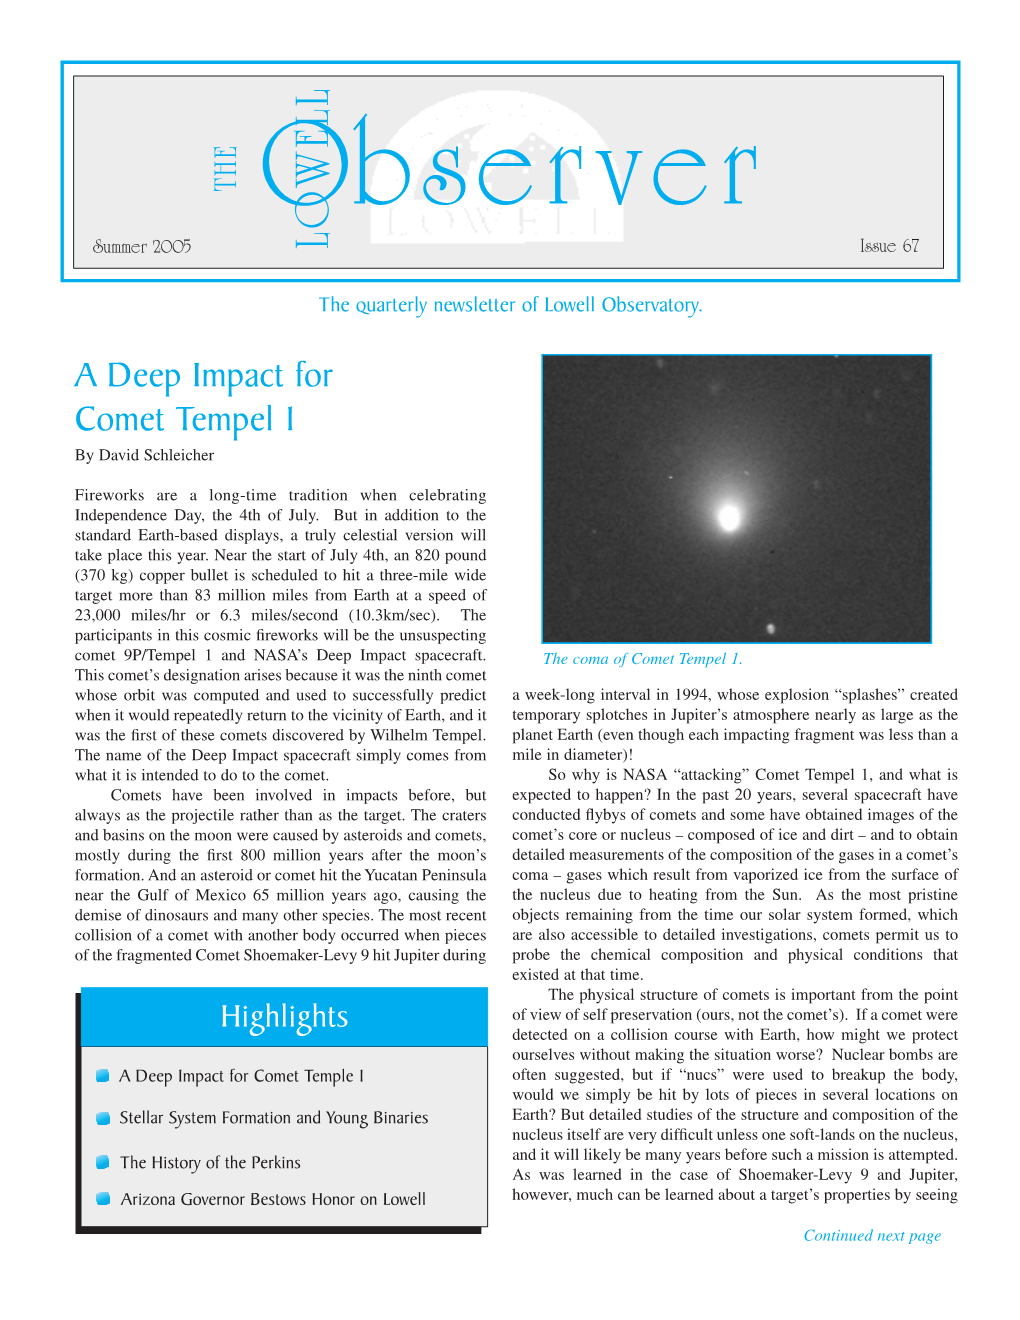 Lowell Observer, Summer 2005, Issue 67